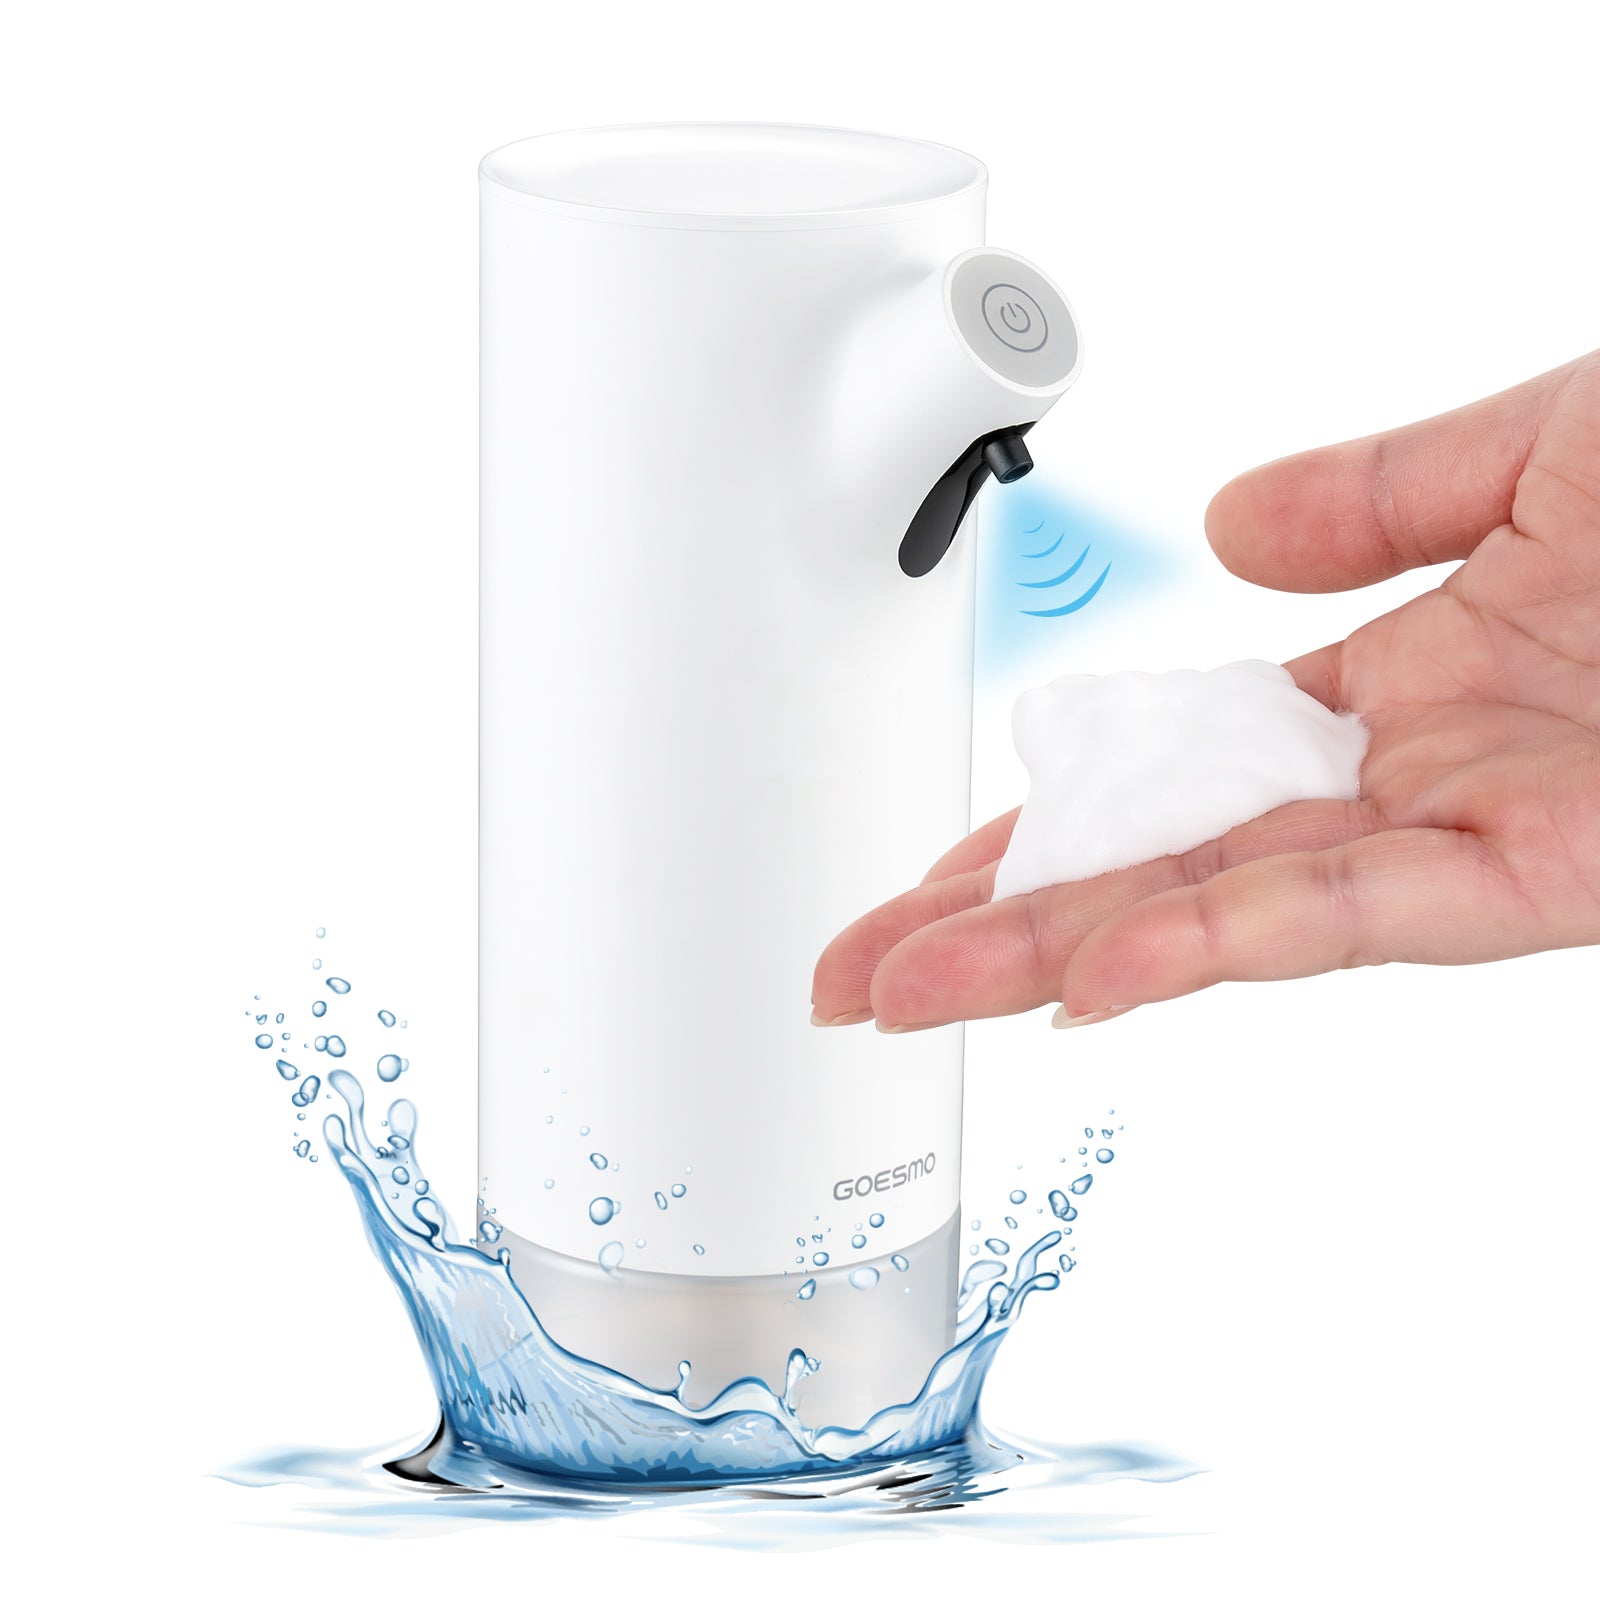 GOESMO 21270 Touchless Foaming Soap Dispenser for Bathroom Kitchen Soap